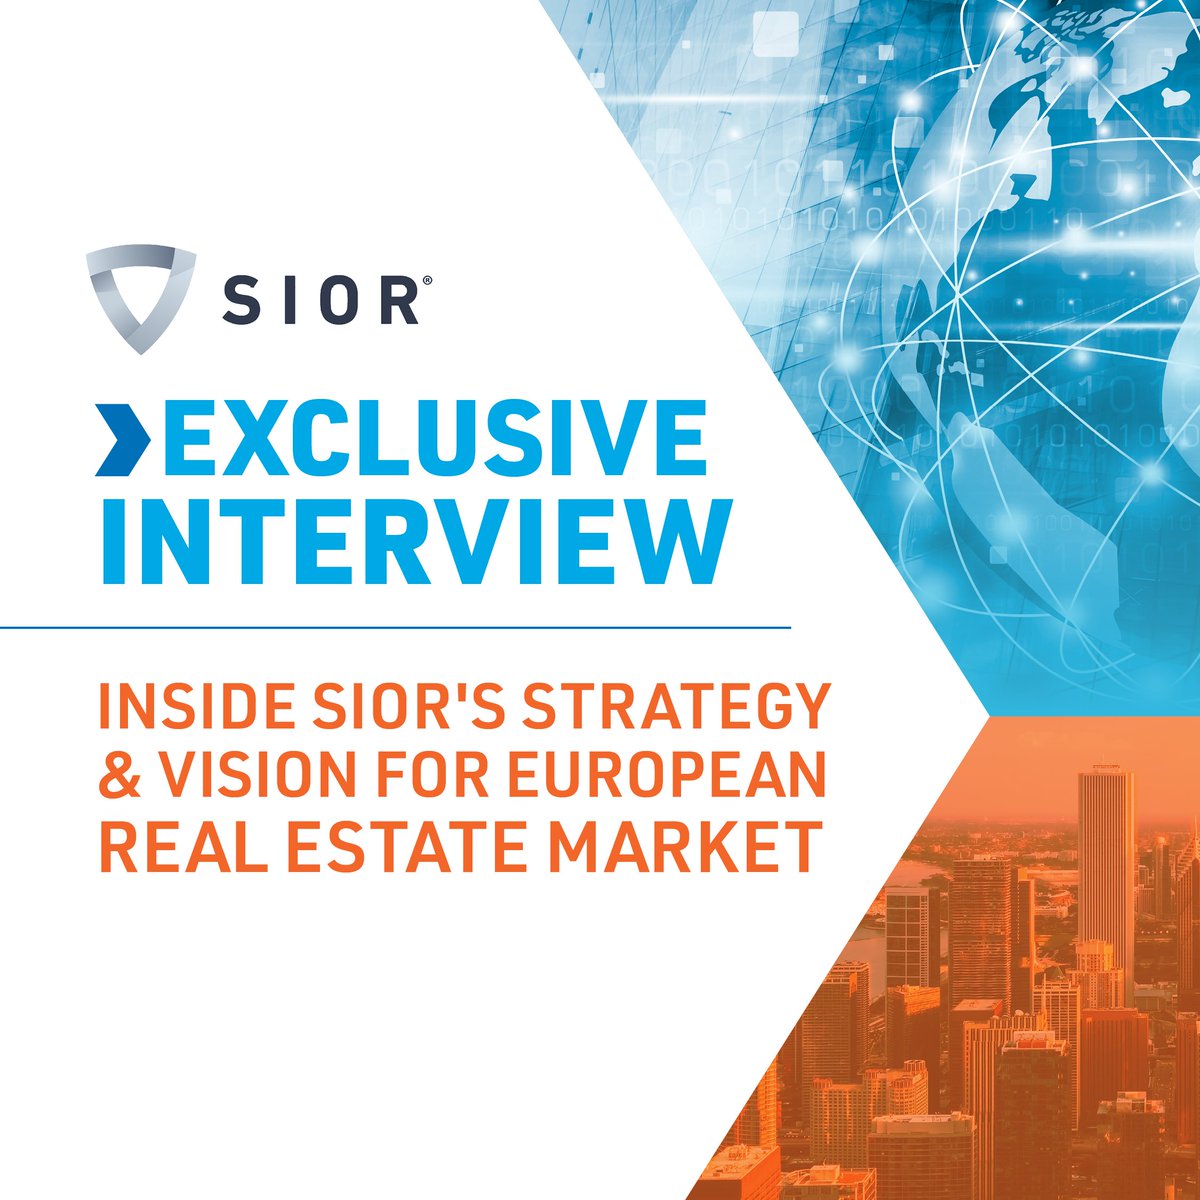 Big news from #MIPIM2024: SIOR poised to shape global commercial real estate. Discover more on SIOR's vision in the exclusive interview w/ SIOR Global CEO, @rgthornburgh, & SIOR Global President, @DLockwoodiii: hubs.ly/Q02vqPWl0 #SIOR #GlobalExcellence #FutureForward